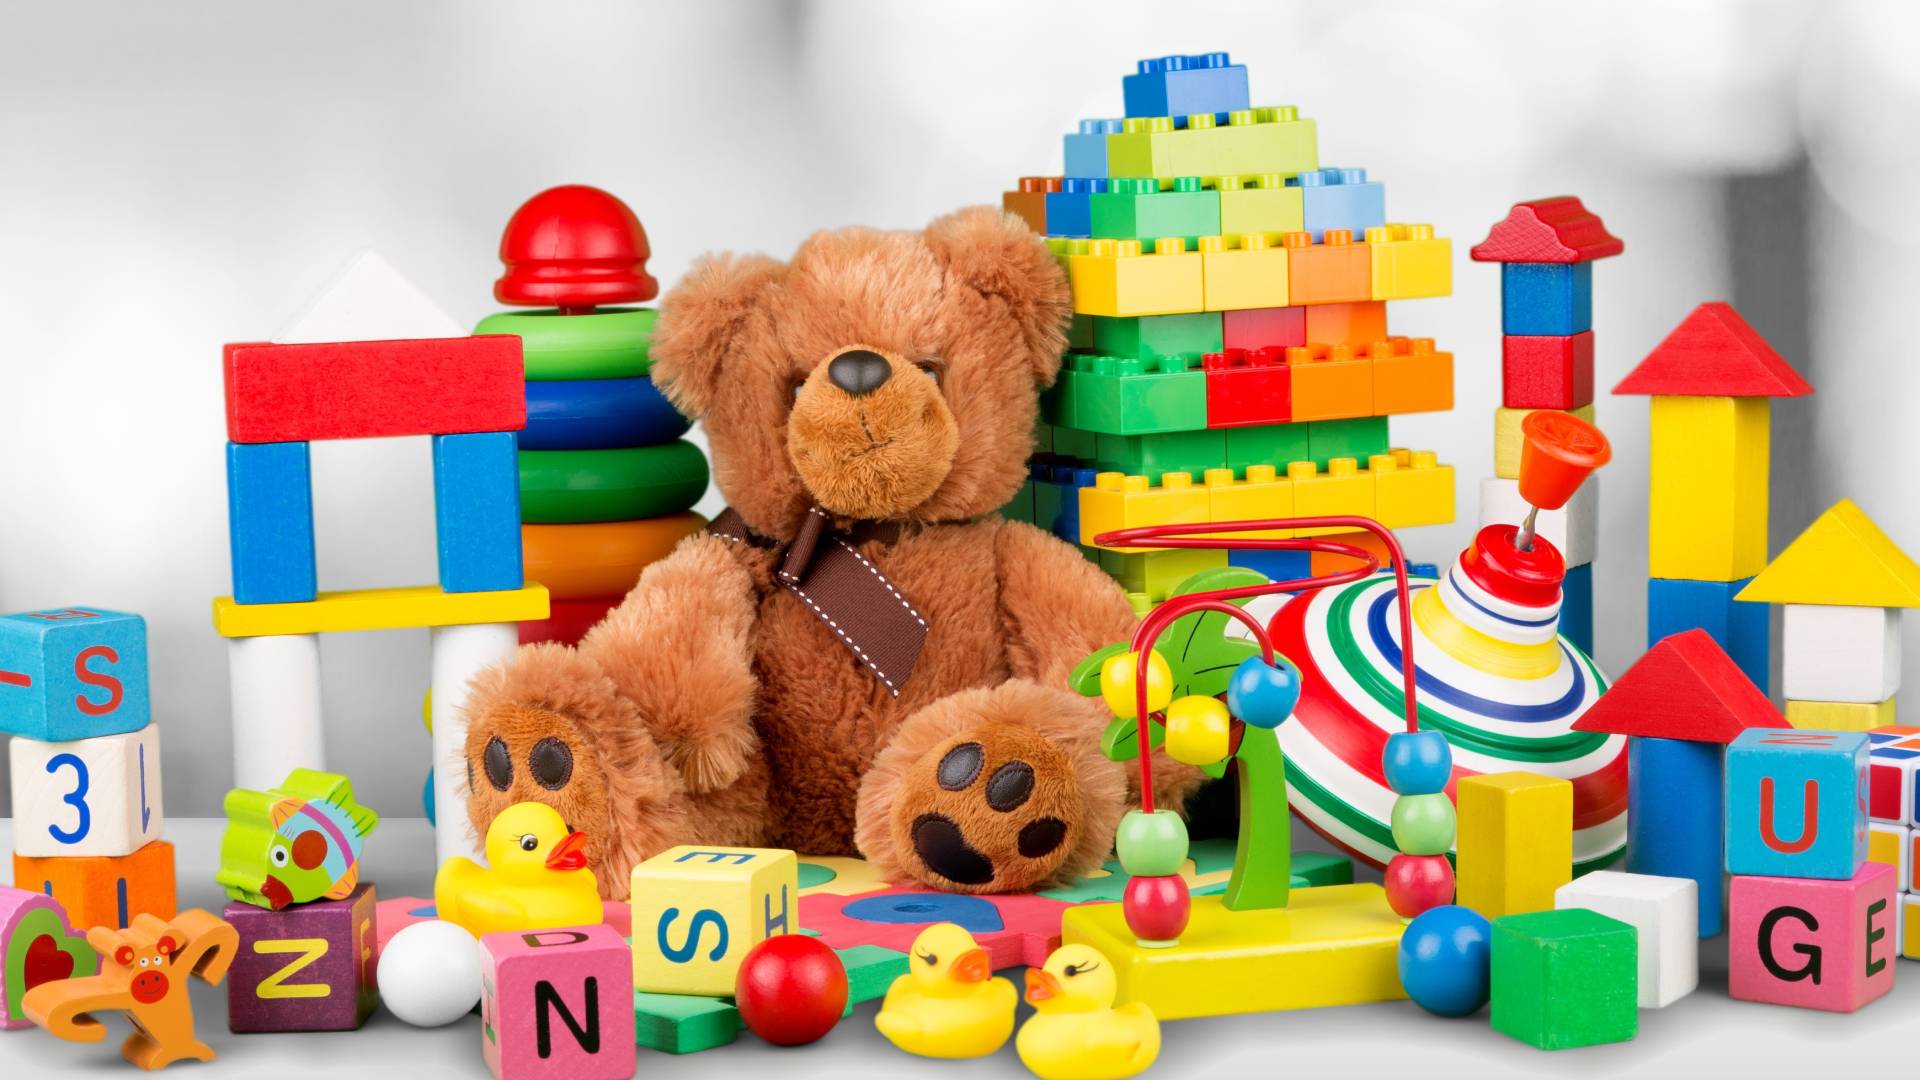 A pile of colorful toys on a plain white desk, including a stuffed bear, building blocks, alphabet blocks, and rubber ducks.